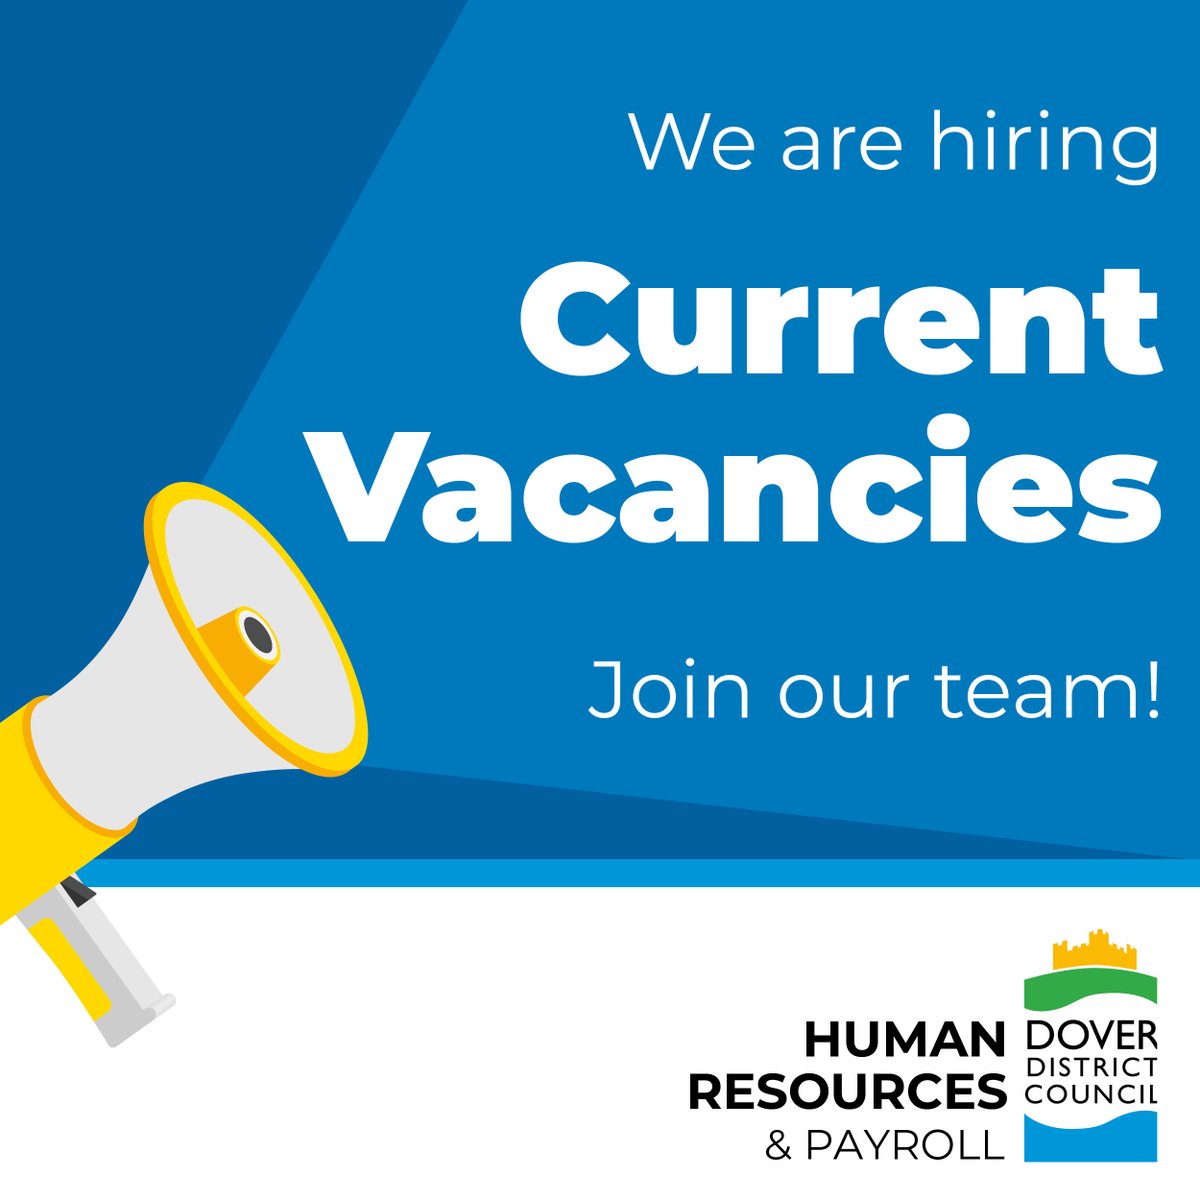 This week's job opportunities at DDC are: Environmental Health Officer (Private Sector Housing) Tenancy Support Officer Dungeness National Nature Reserve Ranger Housing Customer Services Officer For more information and to apply, visit: dover.gov.uk/jobs